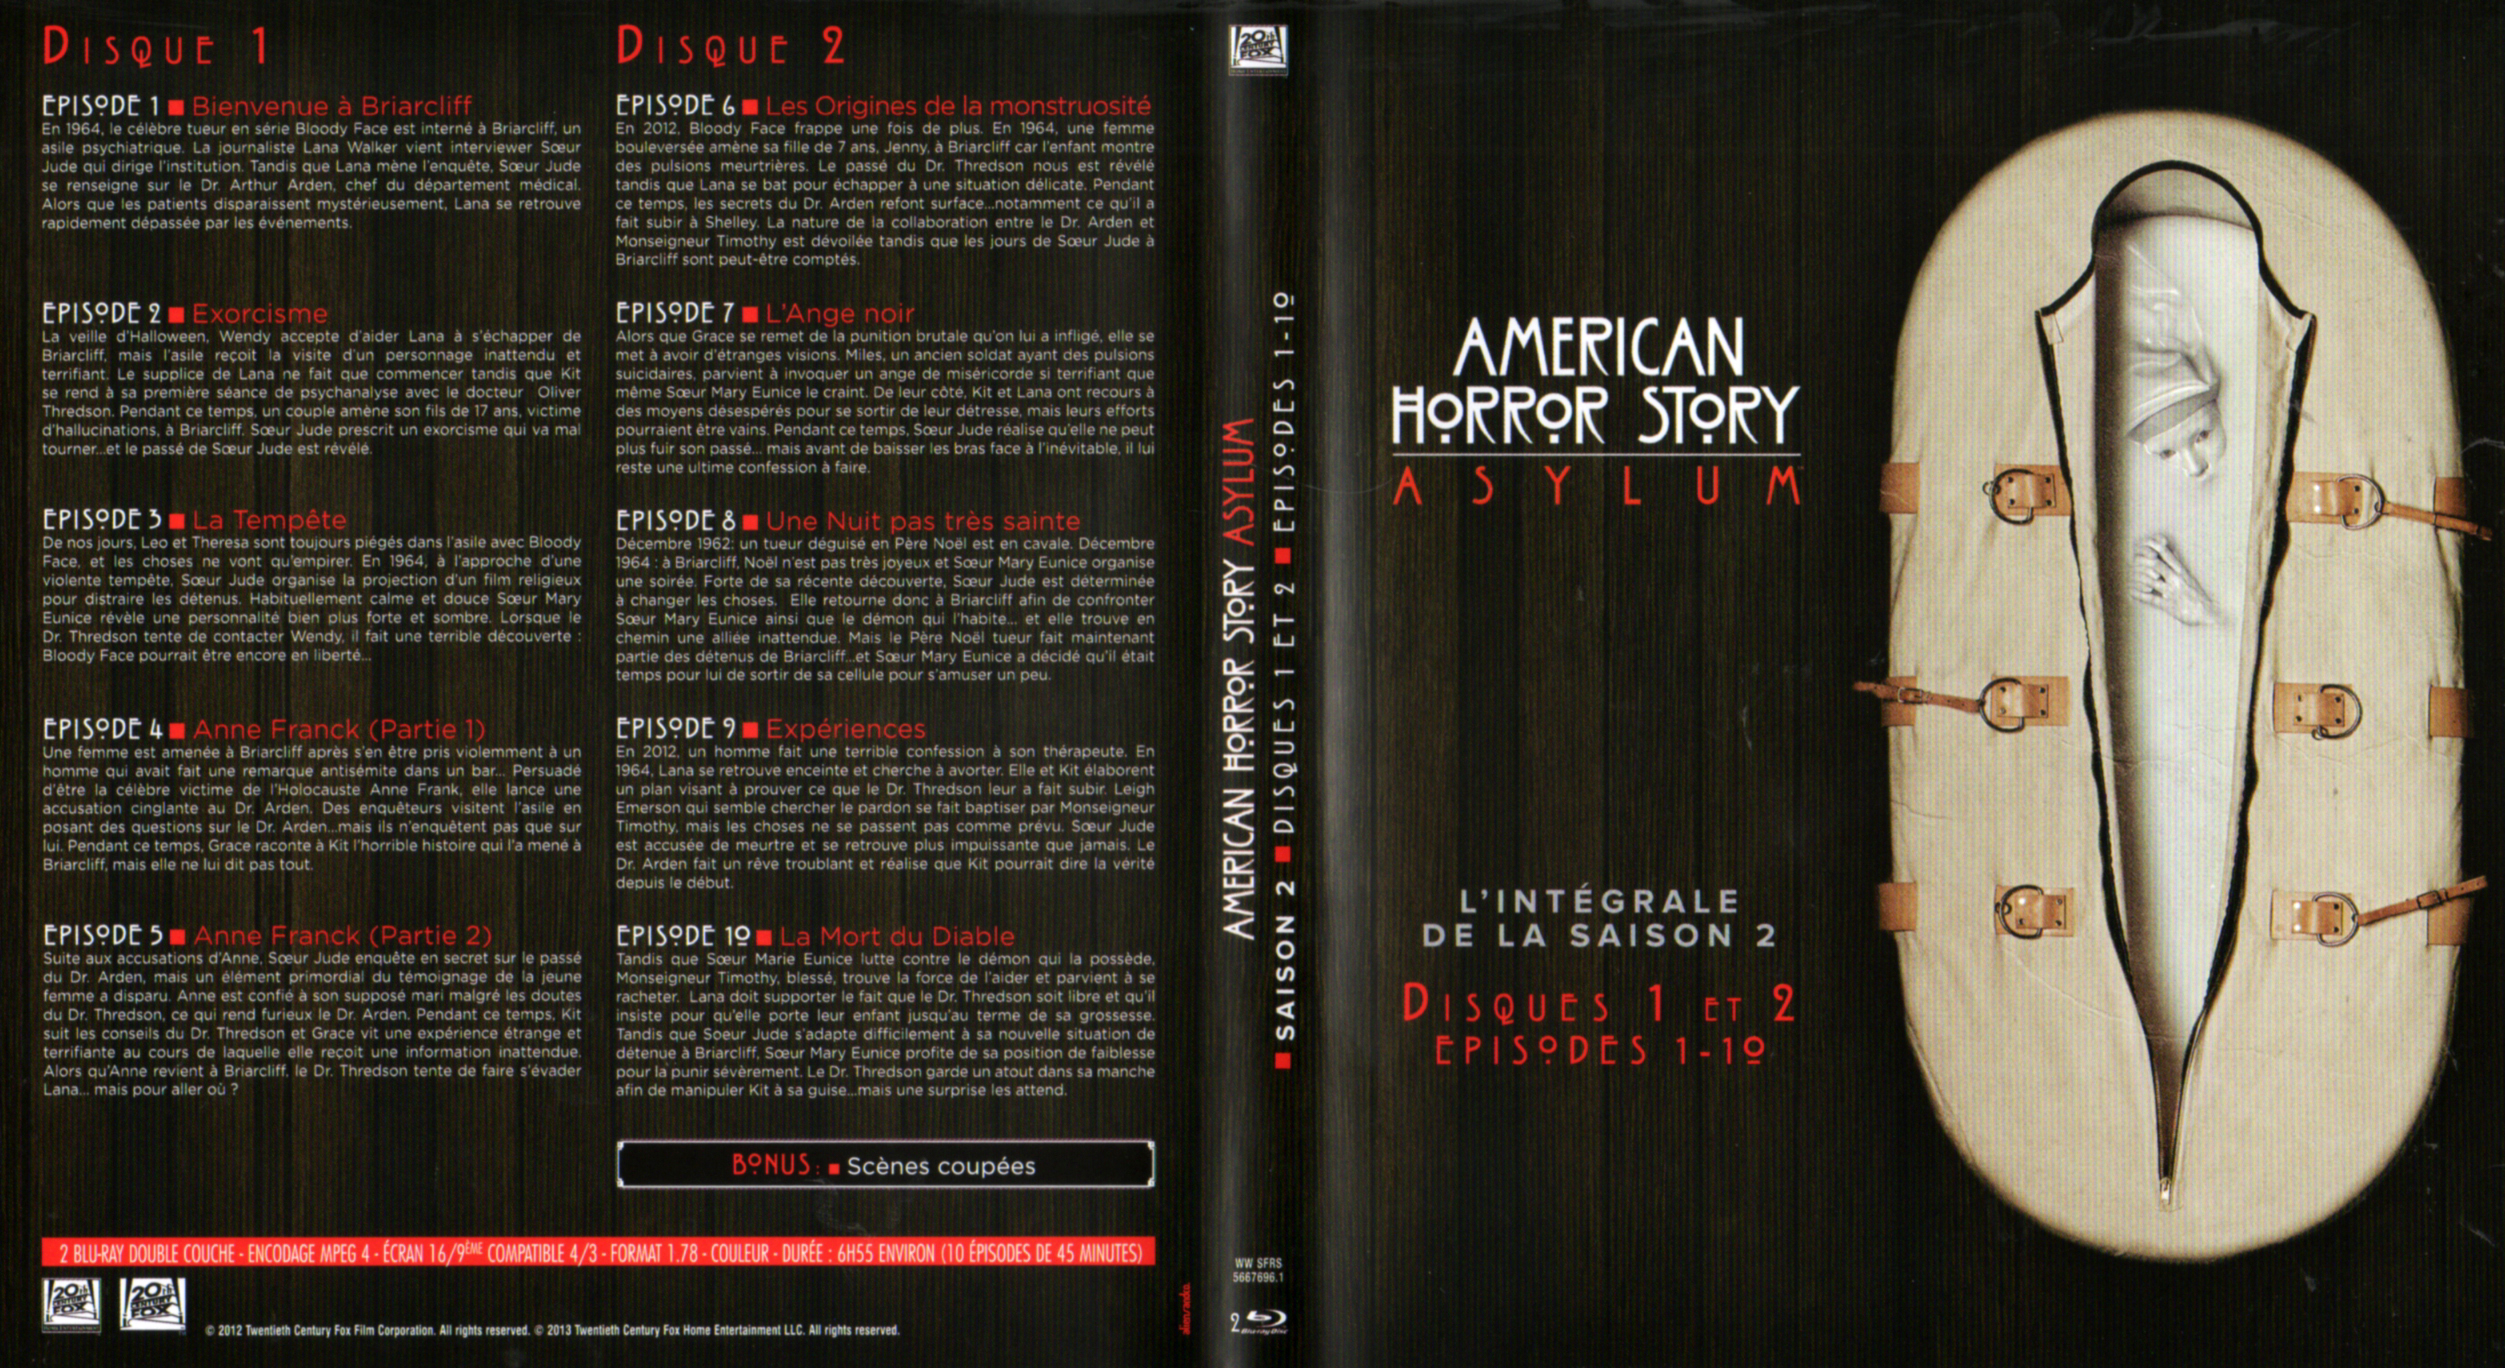 Jaquette DVD American horror story Saison 2 DISC 1 (BLU-RAY)